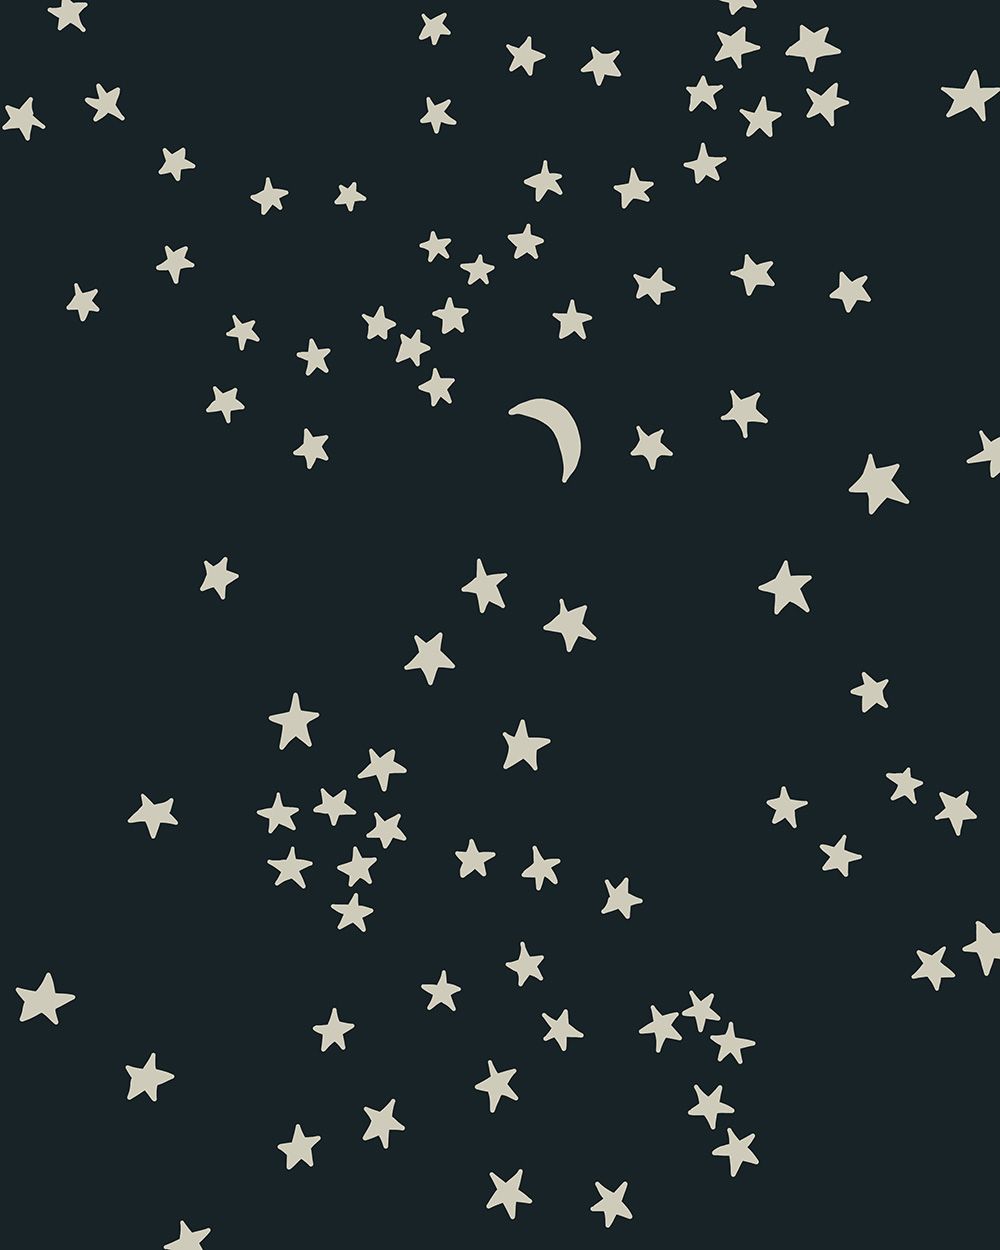 Aesthetic Star Drawing Wallpaper Free Aesthetic Star Drawing Background